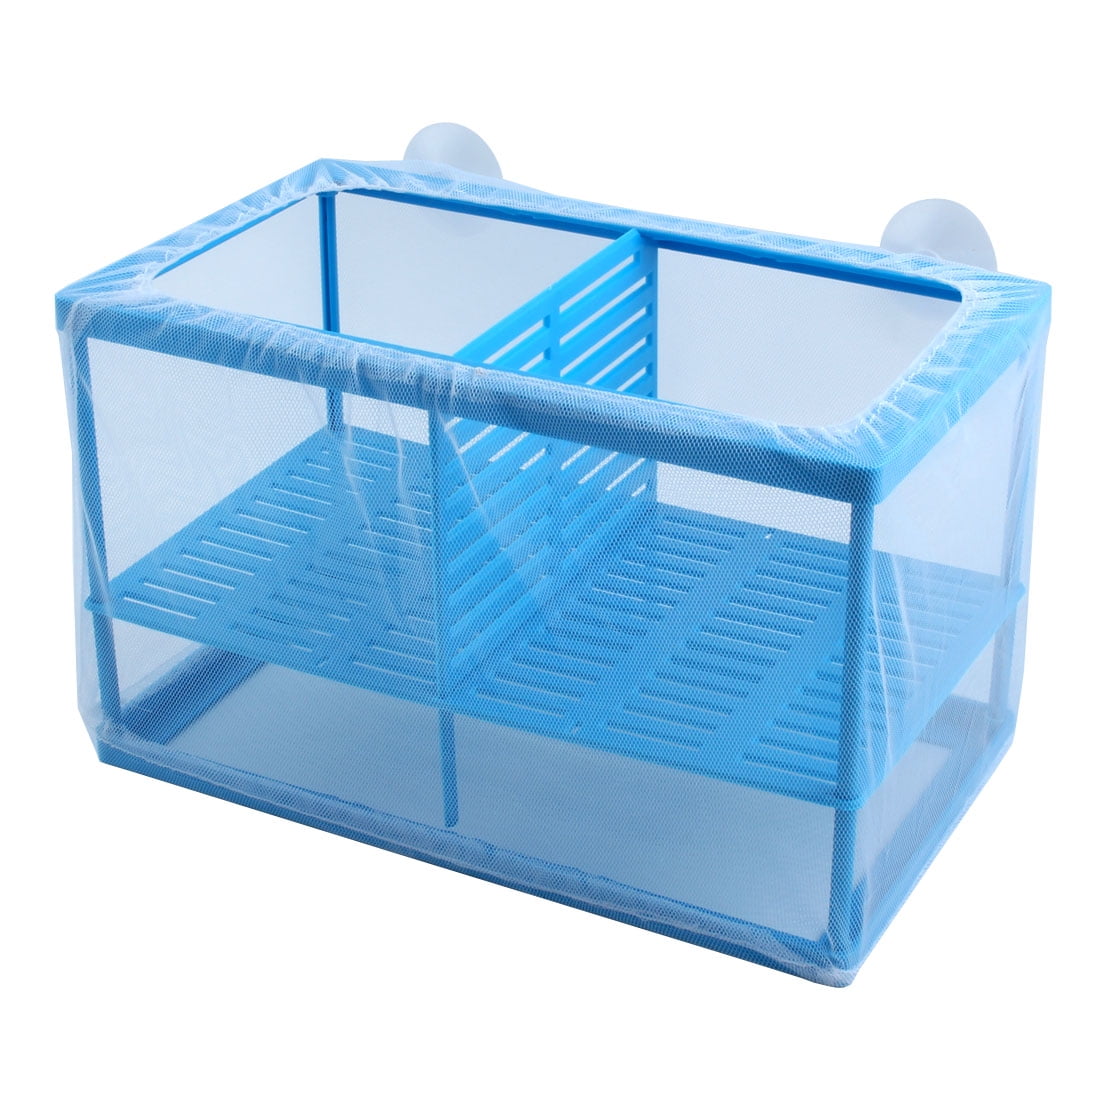 Akamino Large Fish Breeder Isolation Box Plastic Frame Hatching Box Separation Net Breeding Box with Suction Cup for Aquarium 2 Pieces Fish Tank Breeder Net 